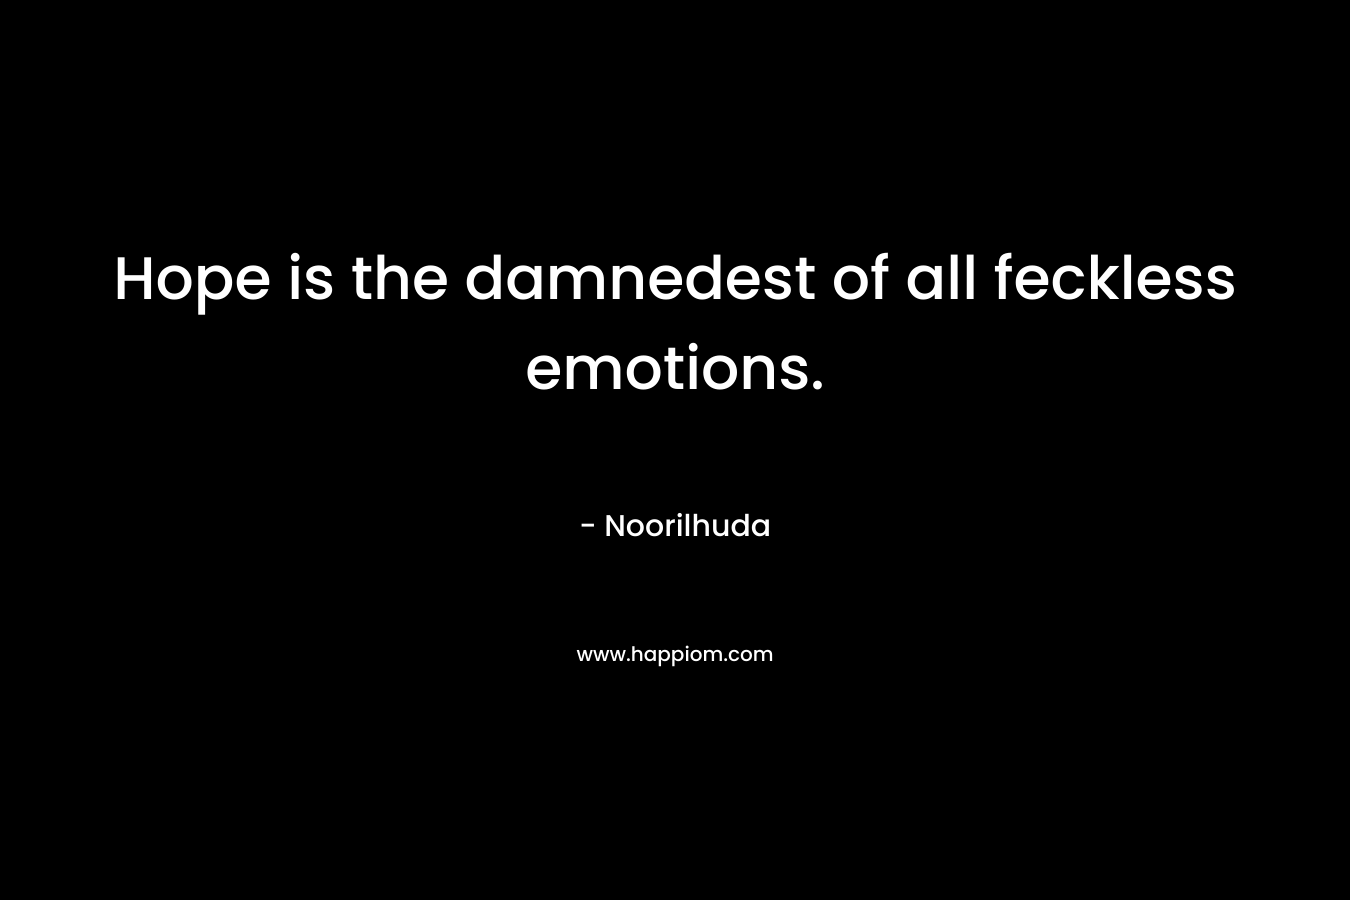 Hope is the damnedest of all feckless emotions.